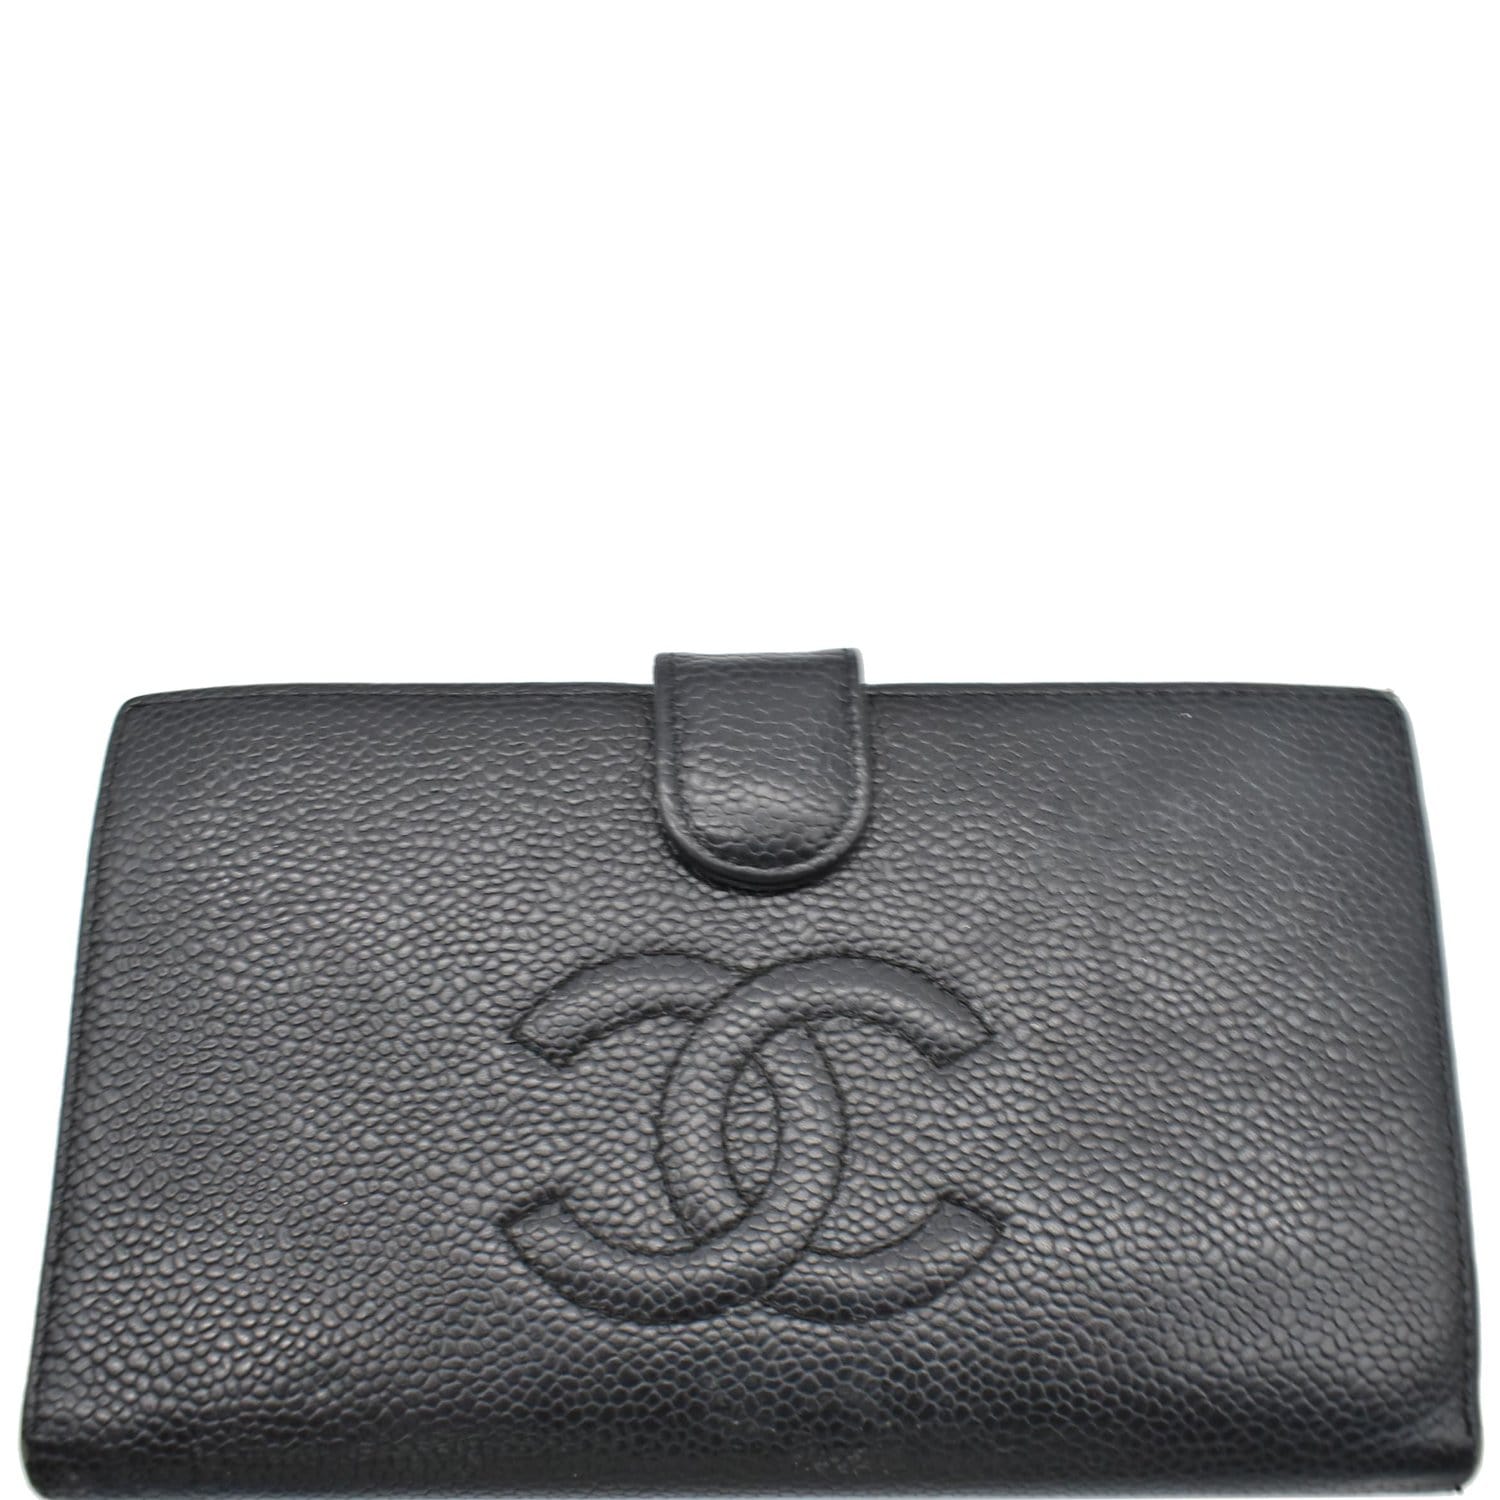 CHANEL #31356 Vintage Black Caviar Leather Snappy Wallet – ALL YOUR BLISS